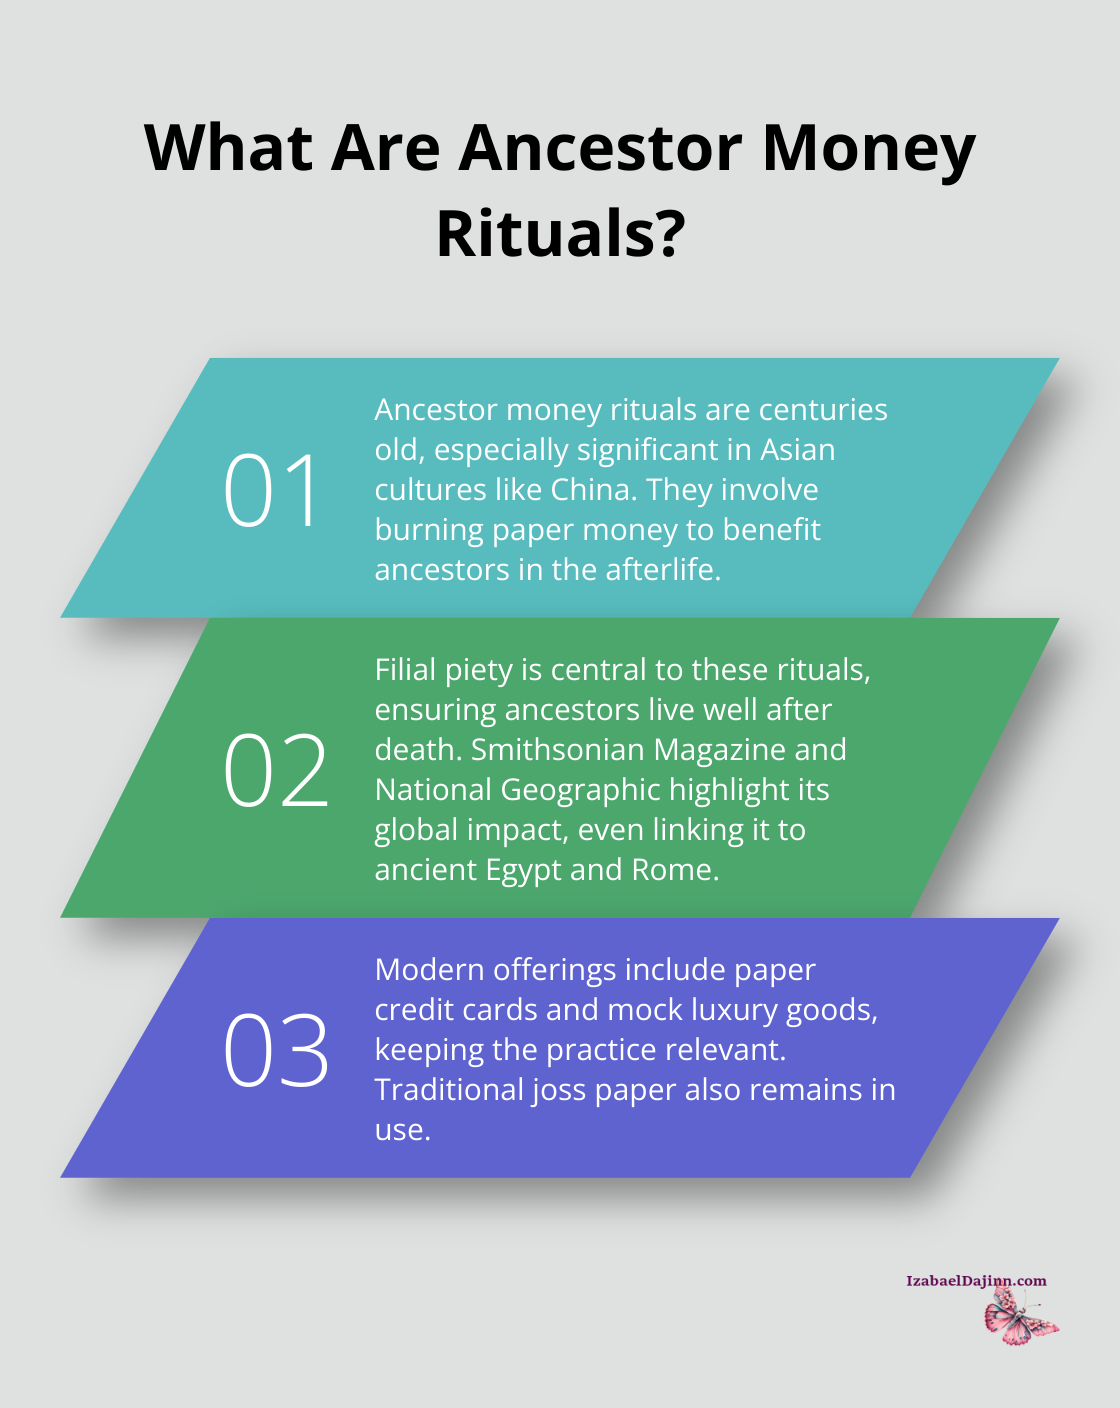 Fact - What Are Ancestor Money Rituals?